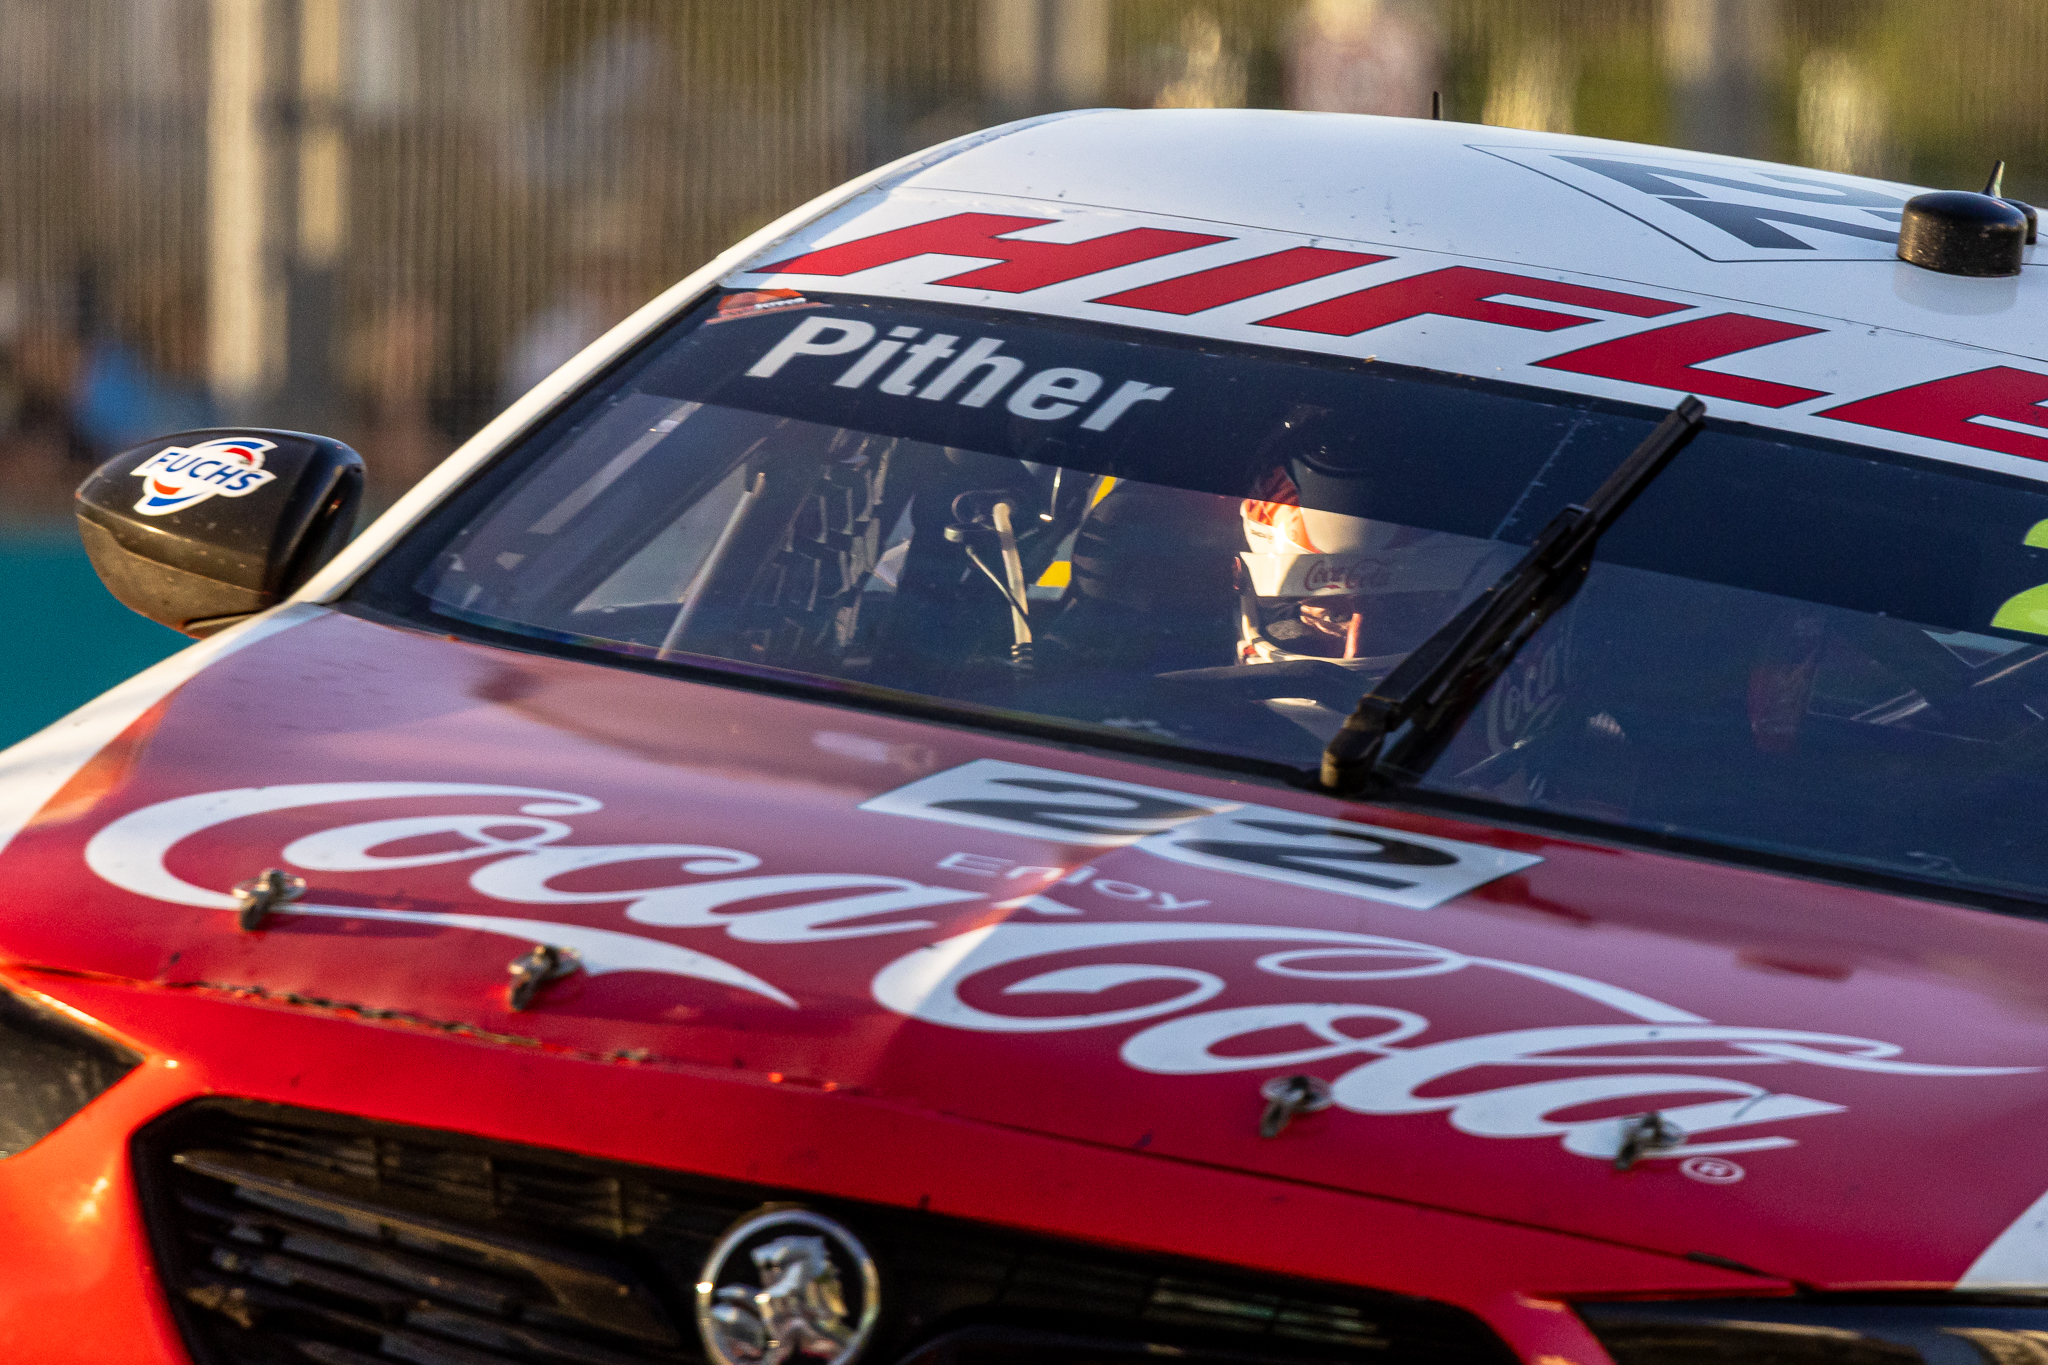 PITHER AND HILL DON ICONIC COCA-COLA LIVERY FOR 2022 REPCO BATHURST 1000